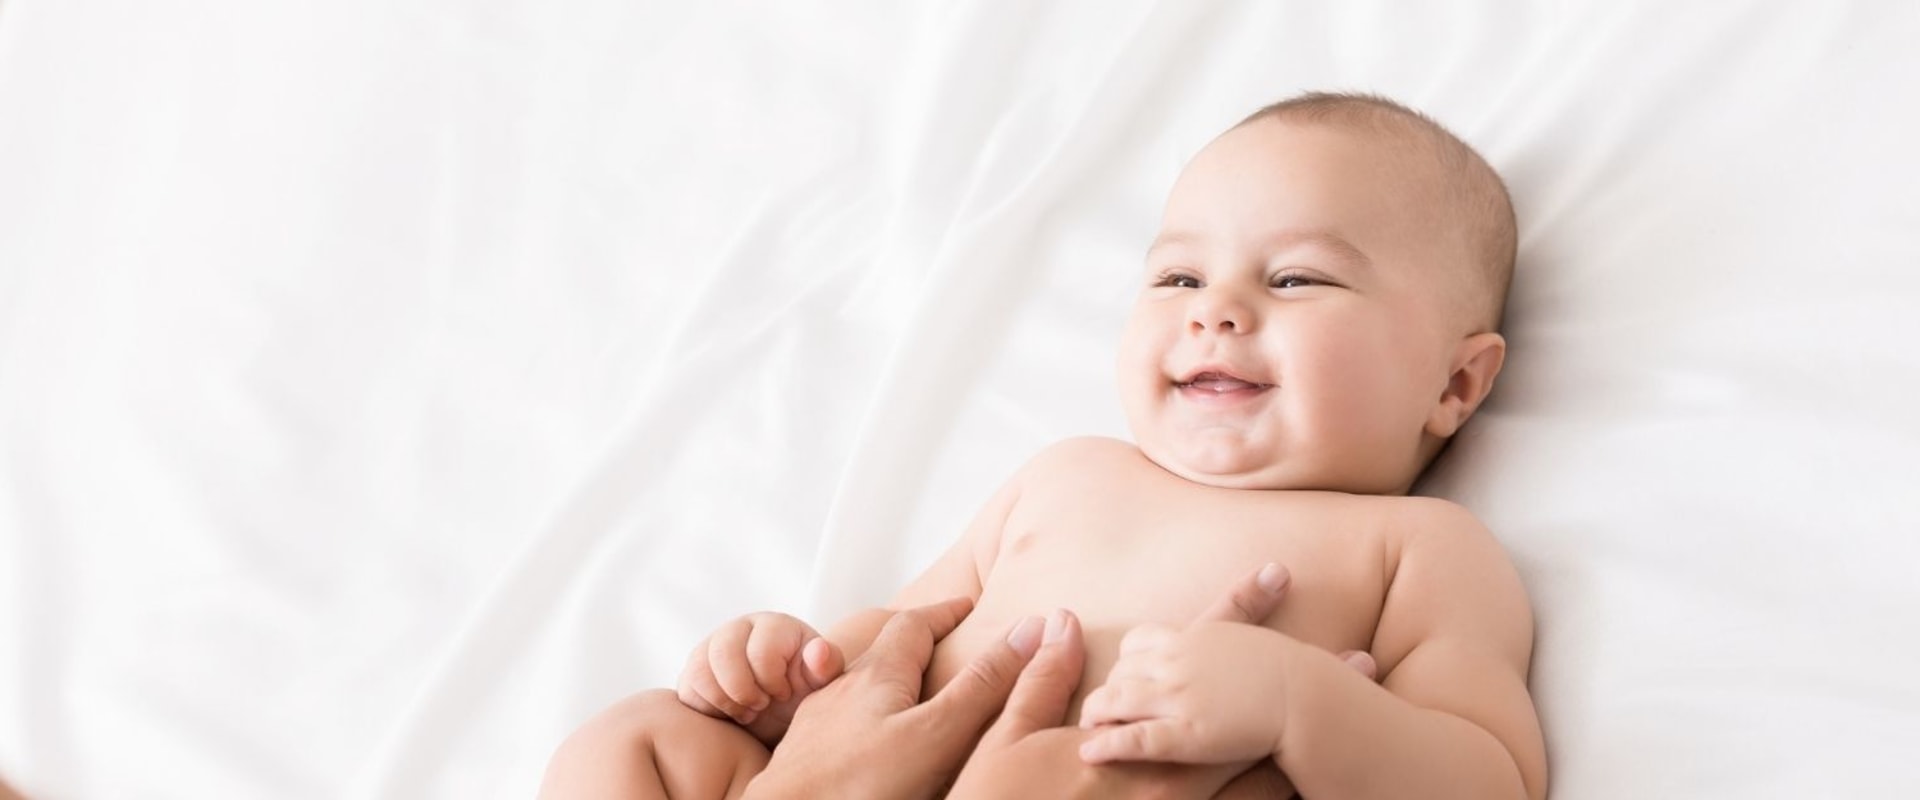 Can Baby Massage Cause Diarrhea? - An Expert's Perspective